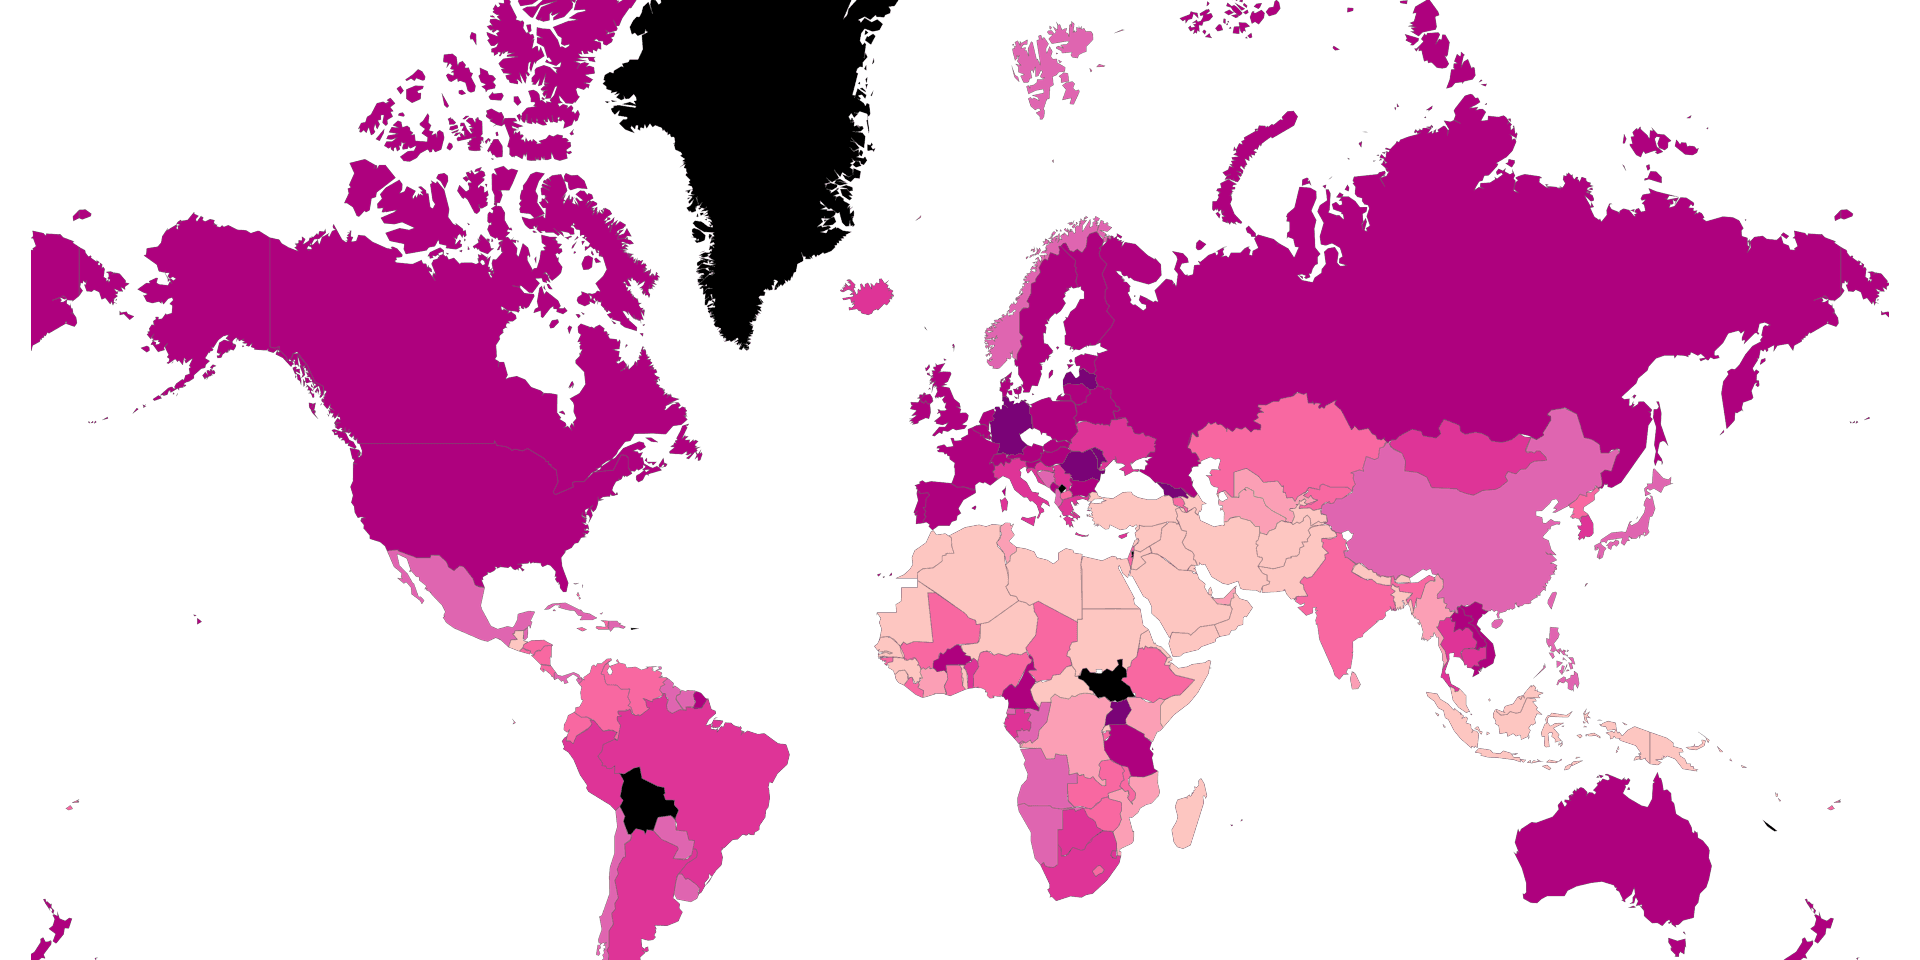 Total Alcohol Consumption Per Capita Liters Of Pure Alcohol (Projected Estimates, 15 Years Of Age+)